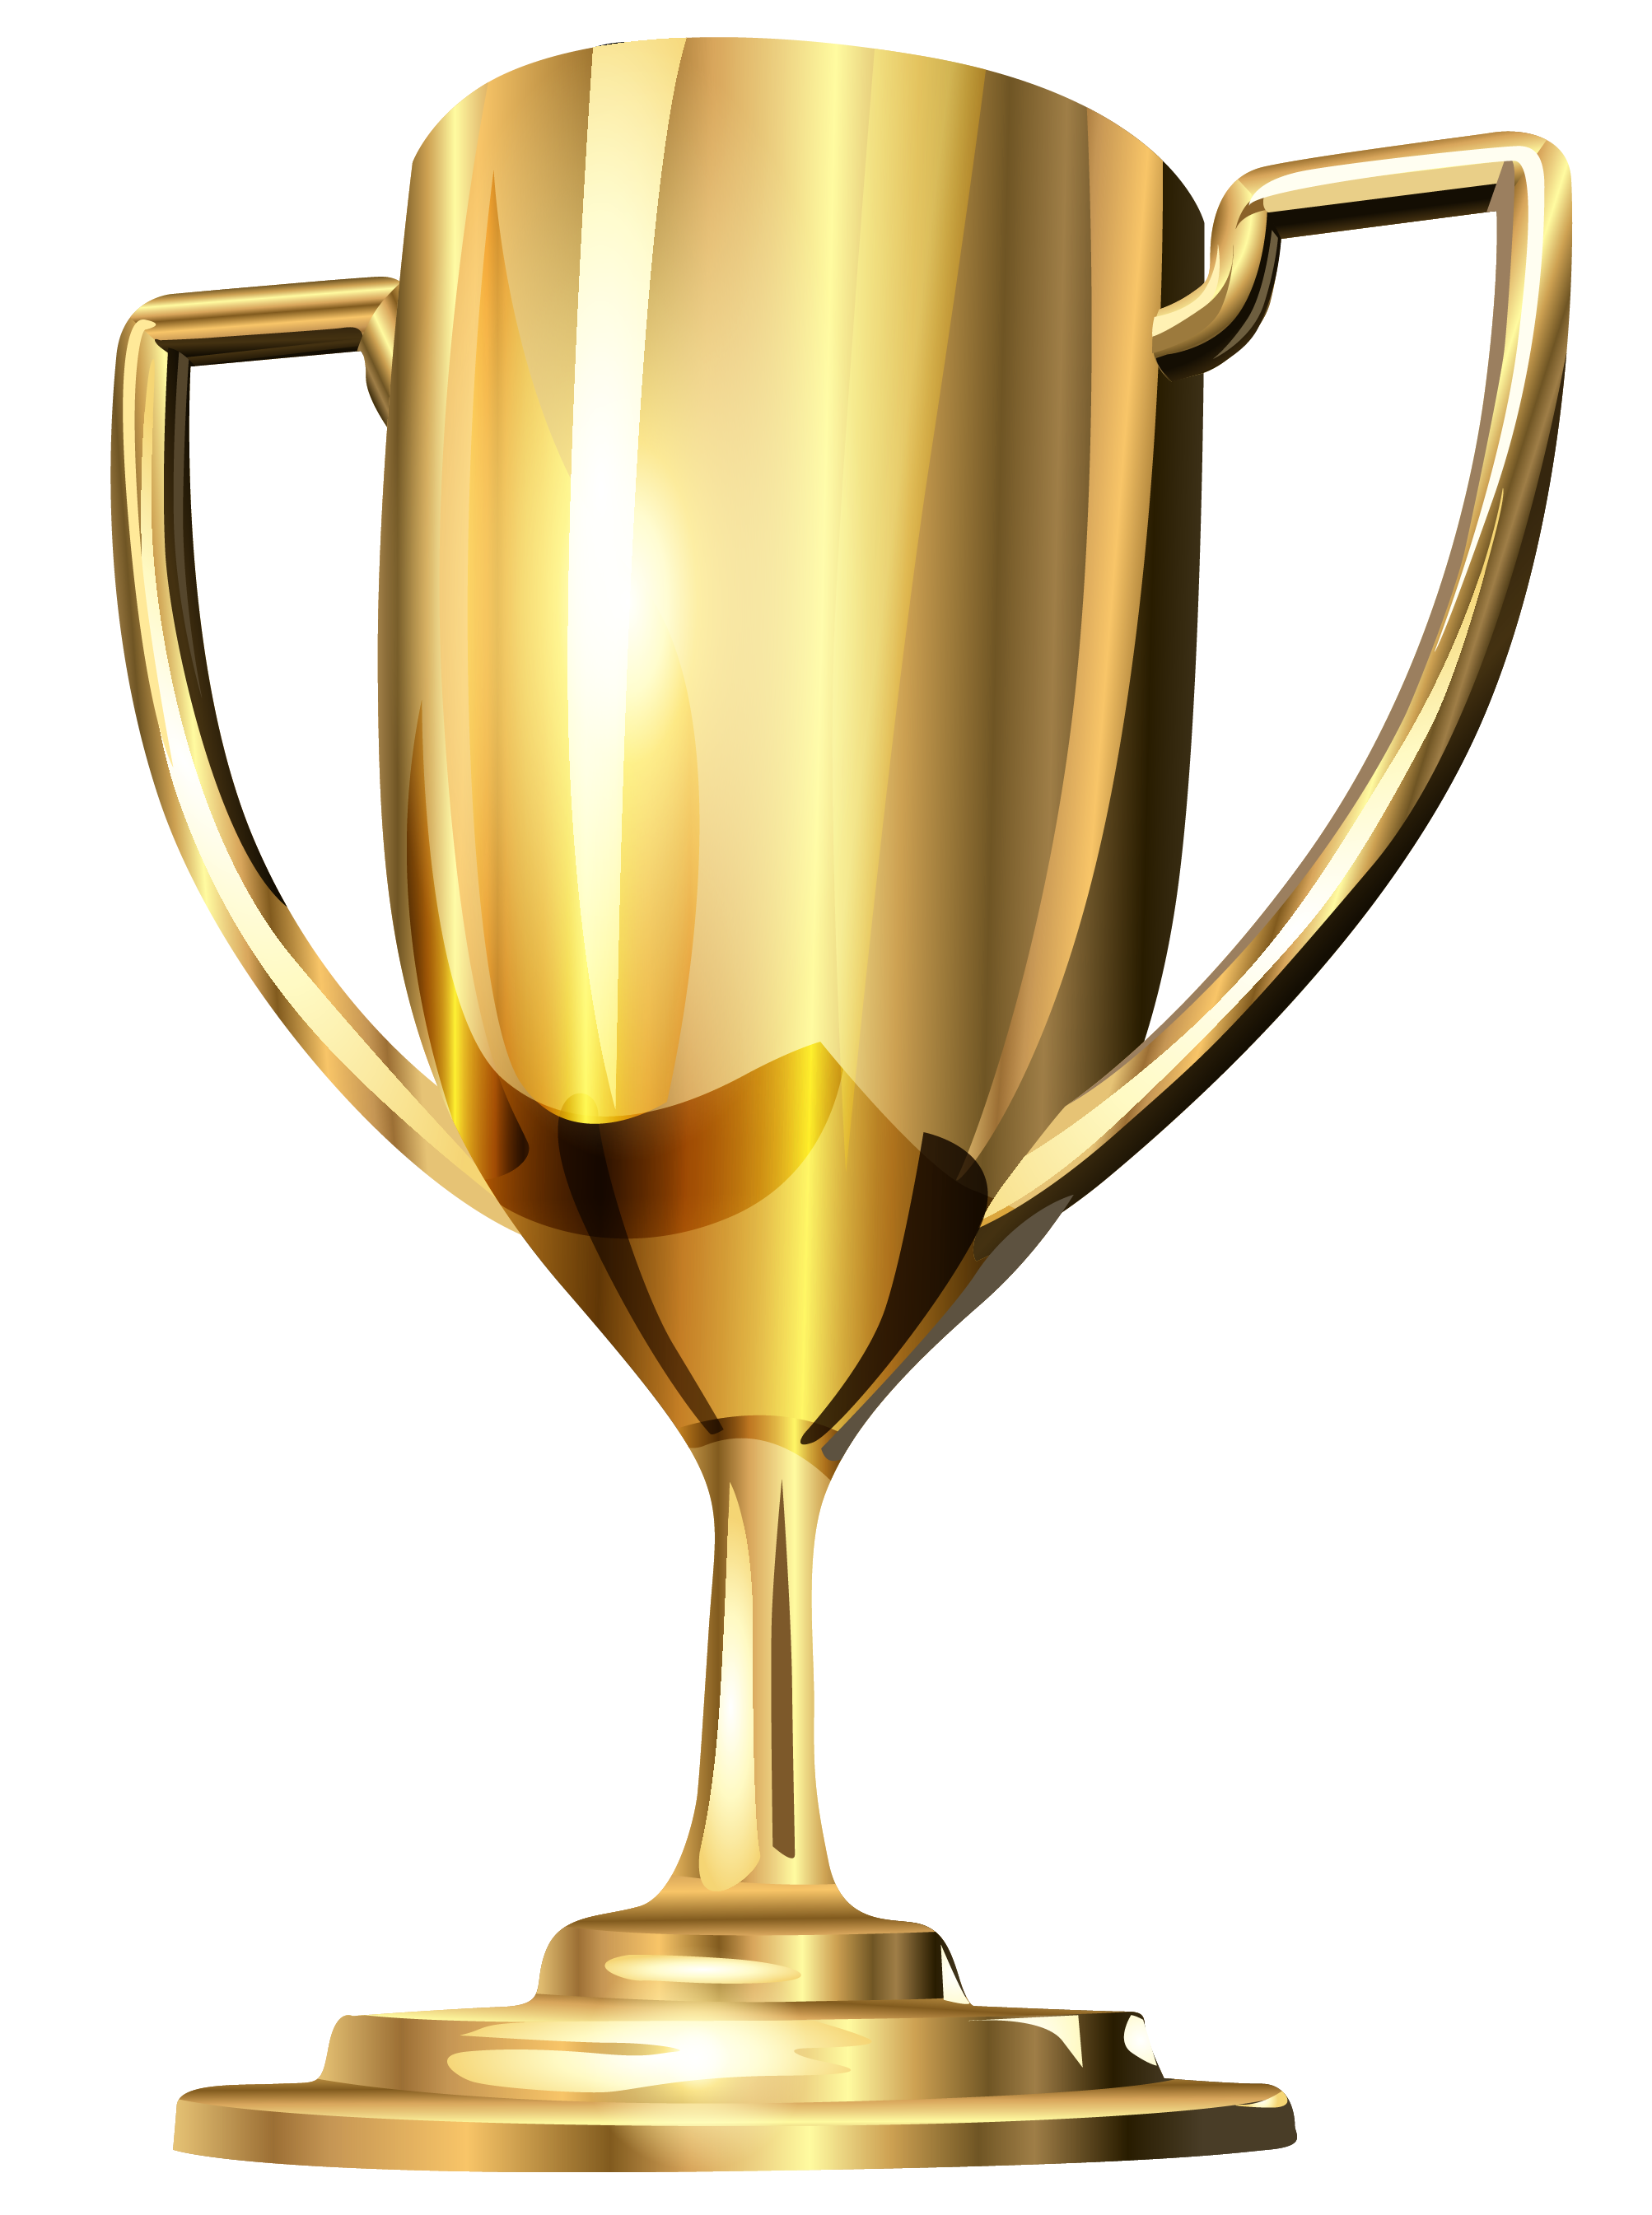 Gold Cup Trophy PNG Image.